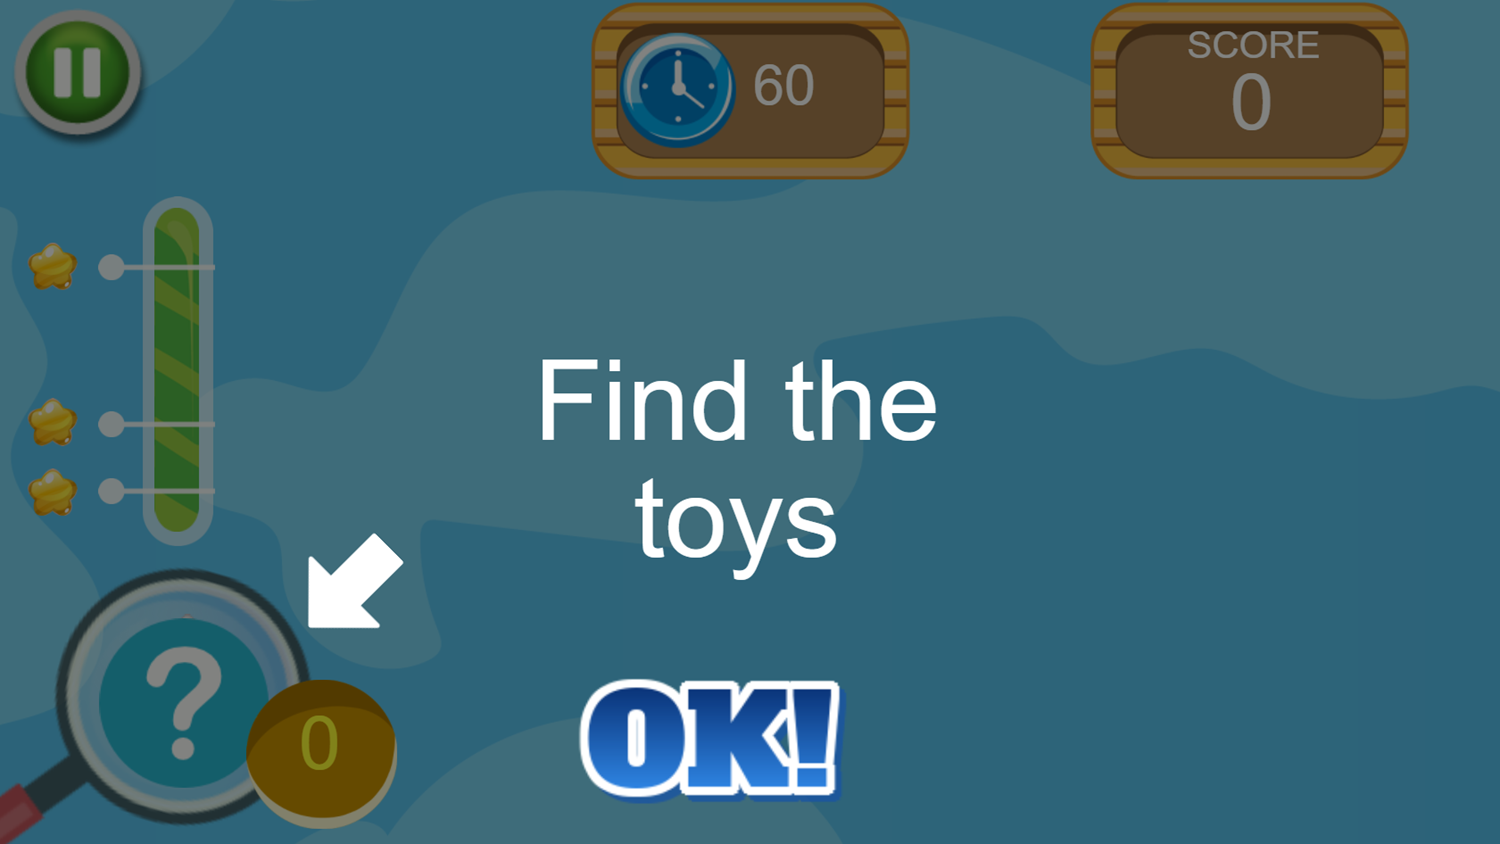 Find Toys Game How To Play Screenshot.